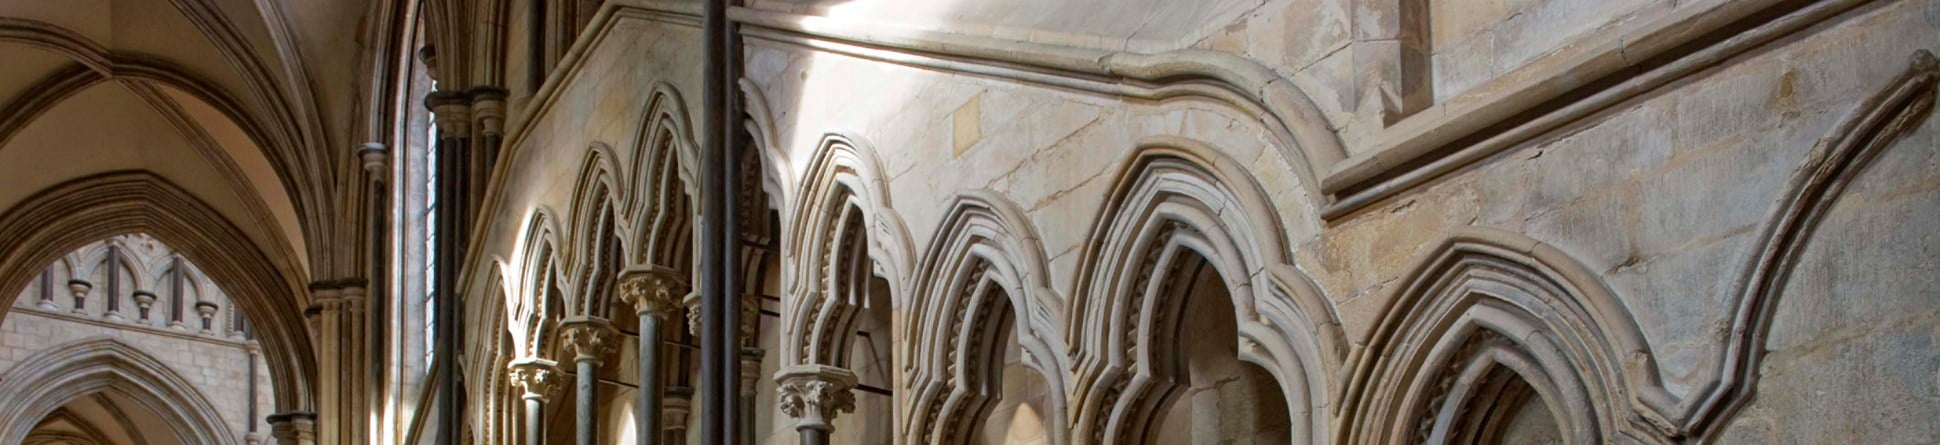 An architectural detail of masonry within a large church